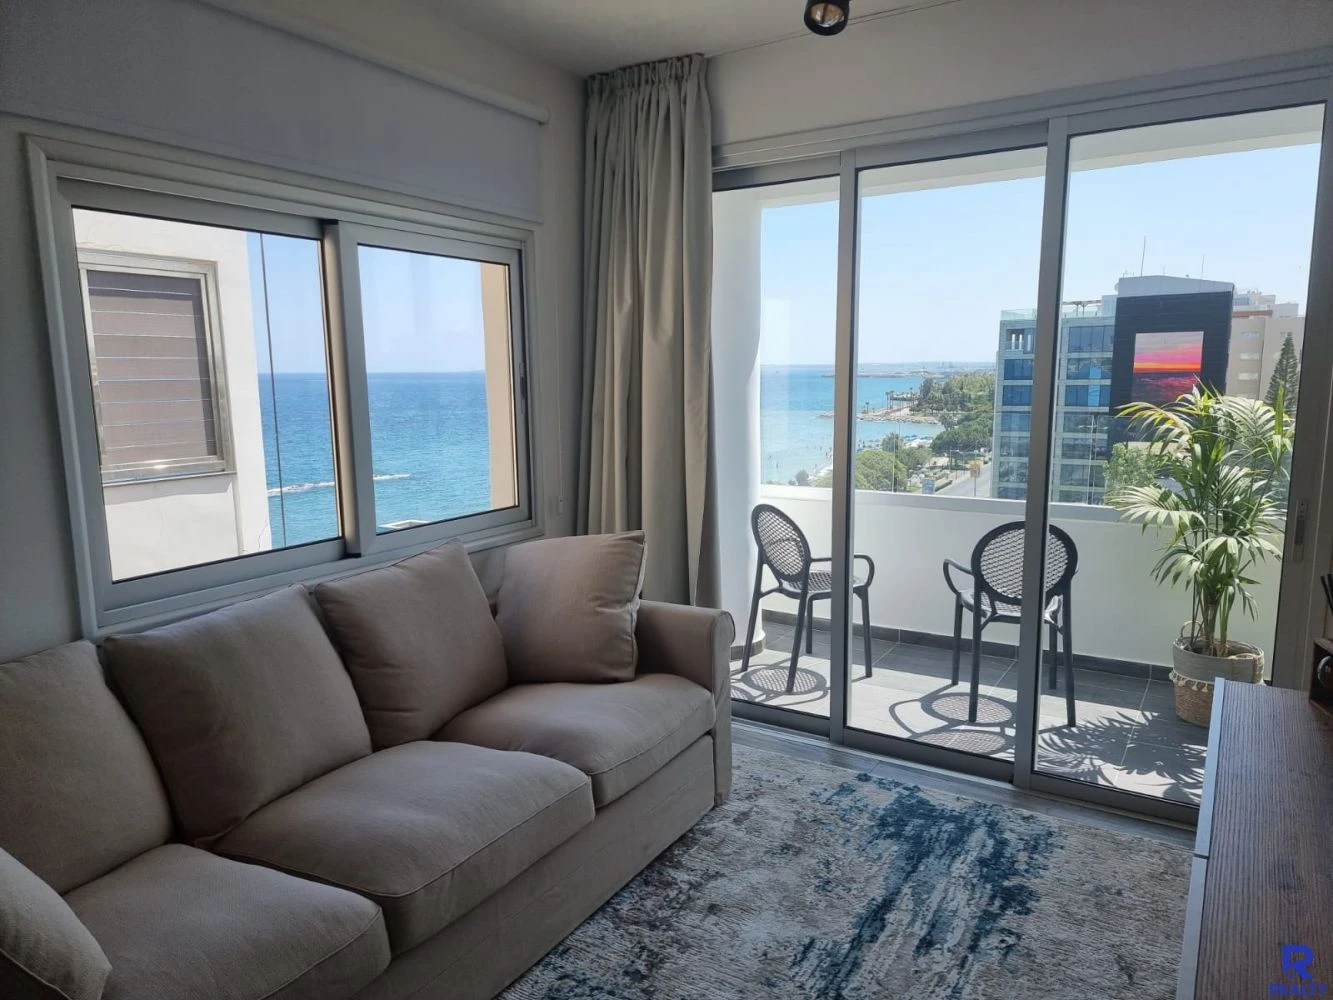 2-Bedroom Apartment with Sea View, image 1